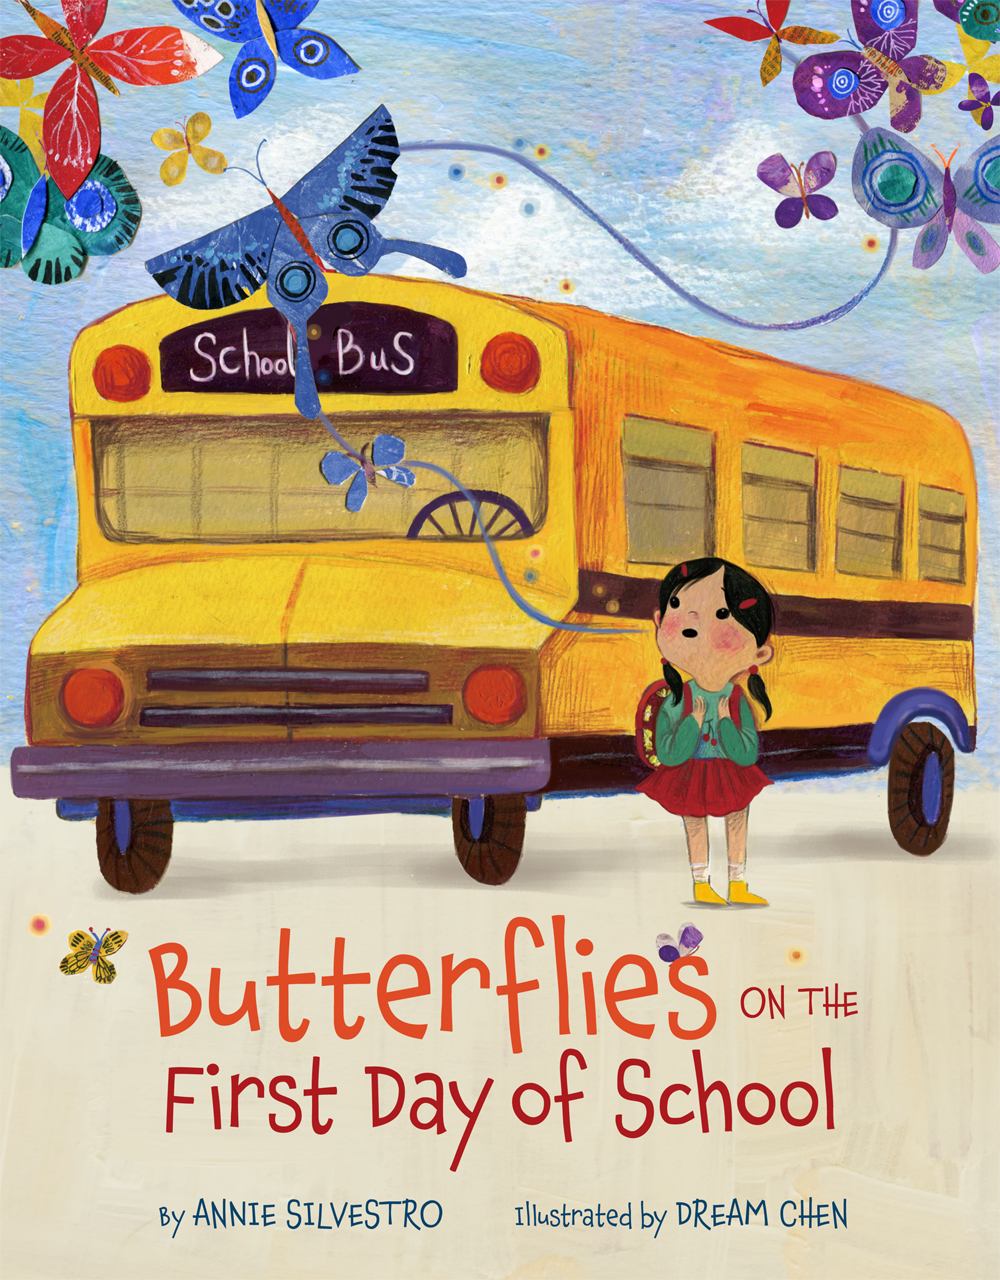 Butterflies on the first day of school book cover.